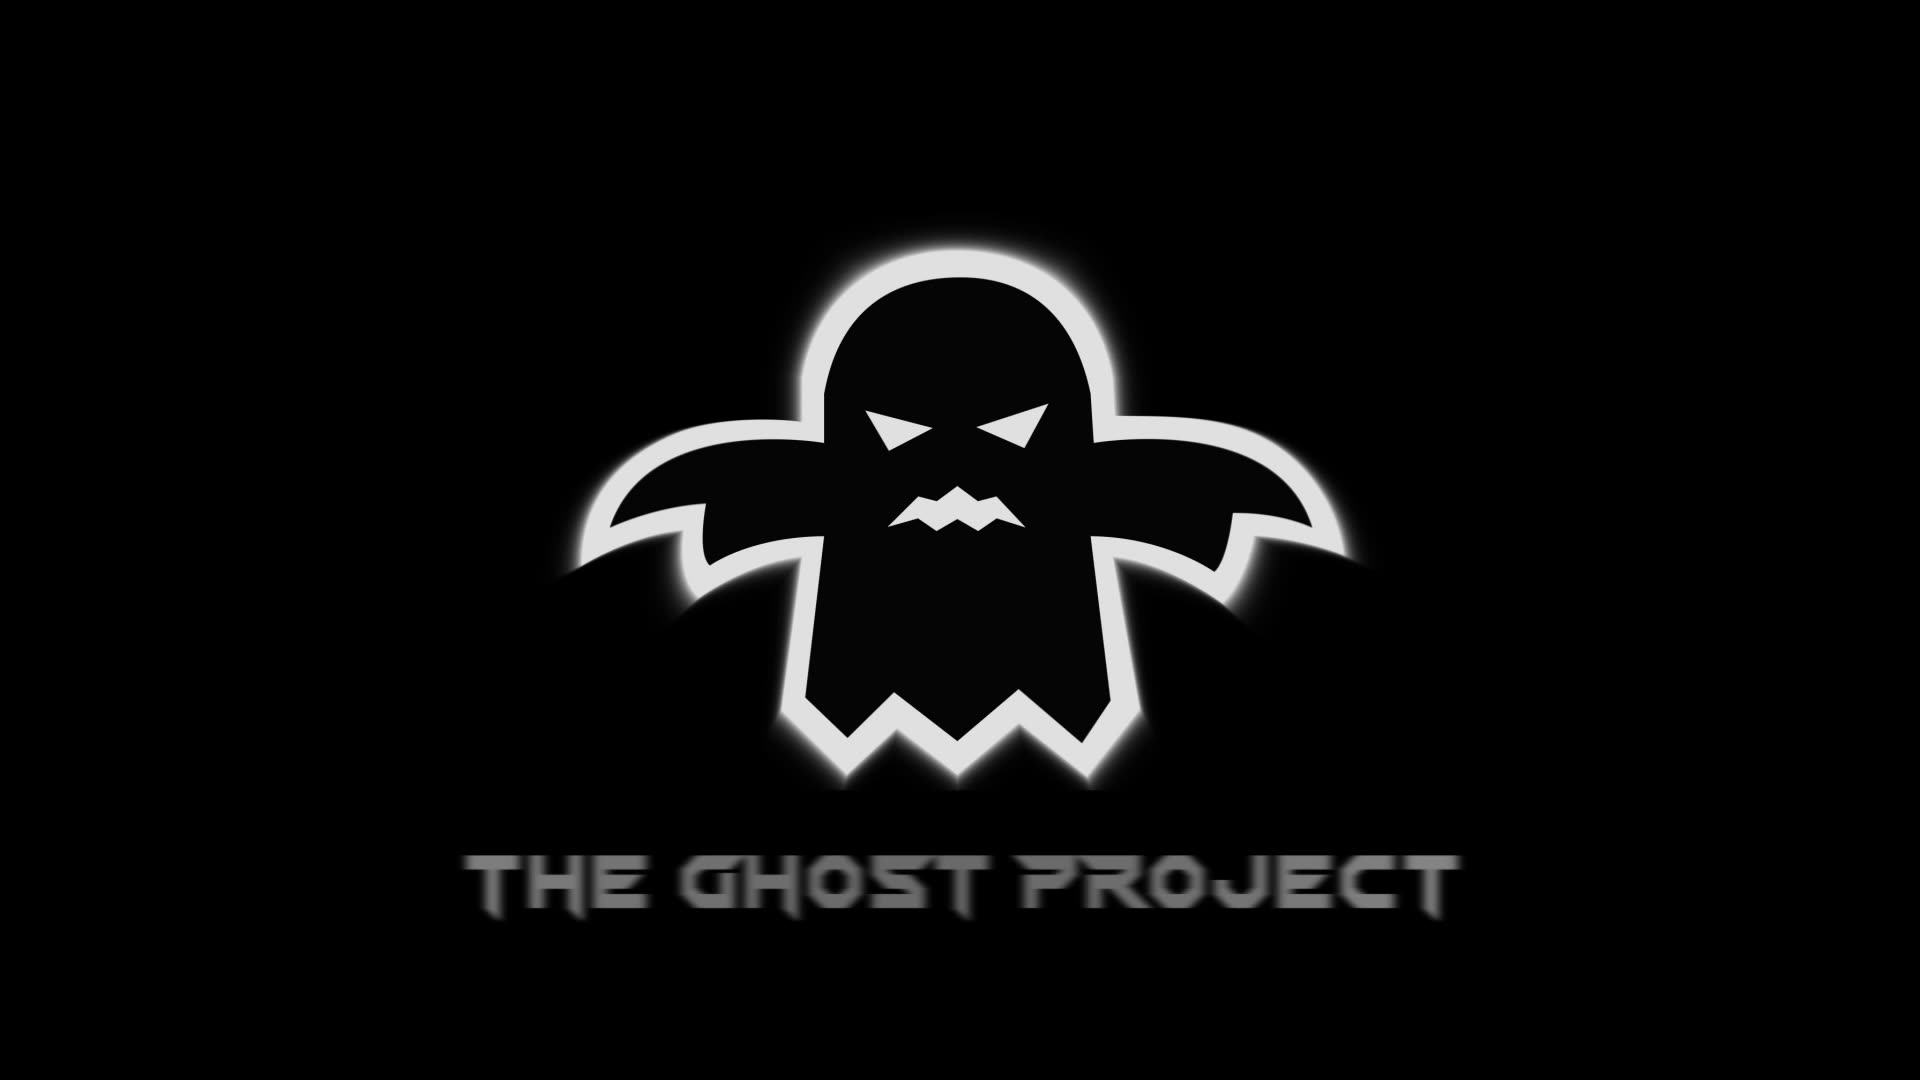 The Ghost Project Intro